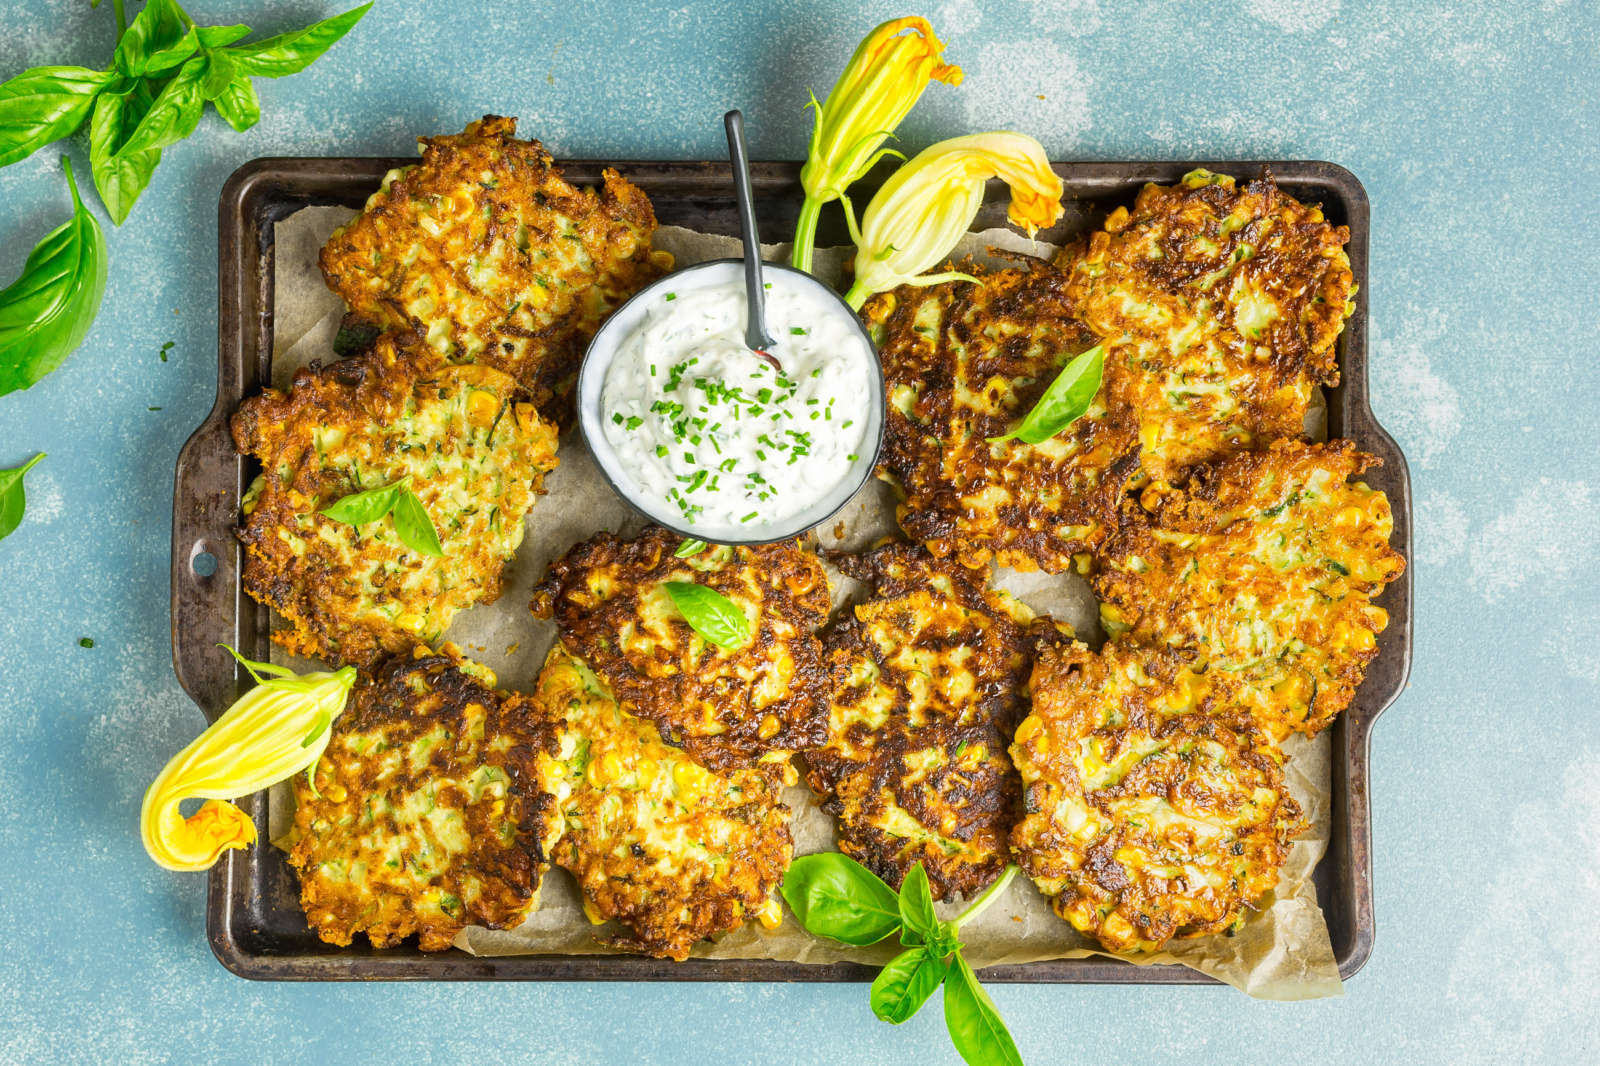 Cheesy Zucchini and Corn Fritters with Herb Sour Cream